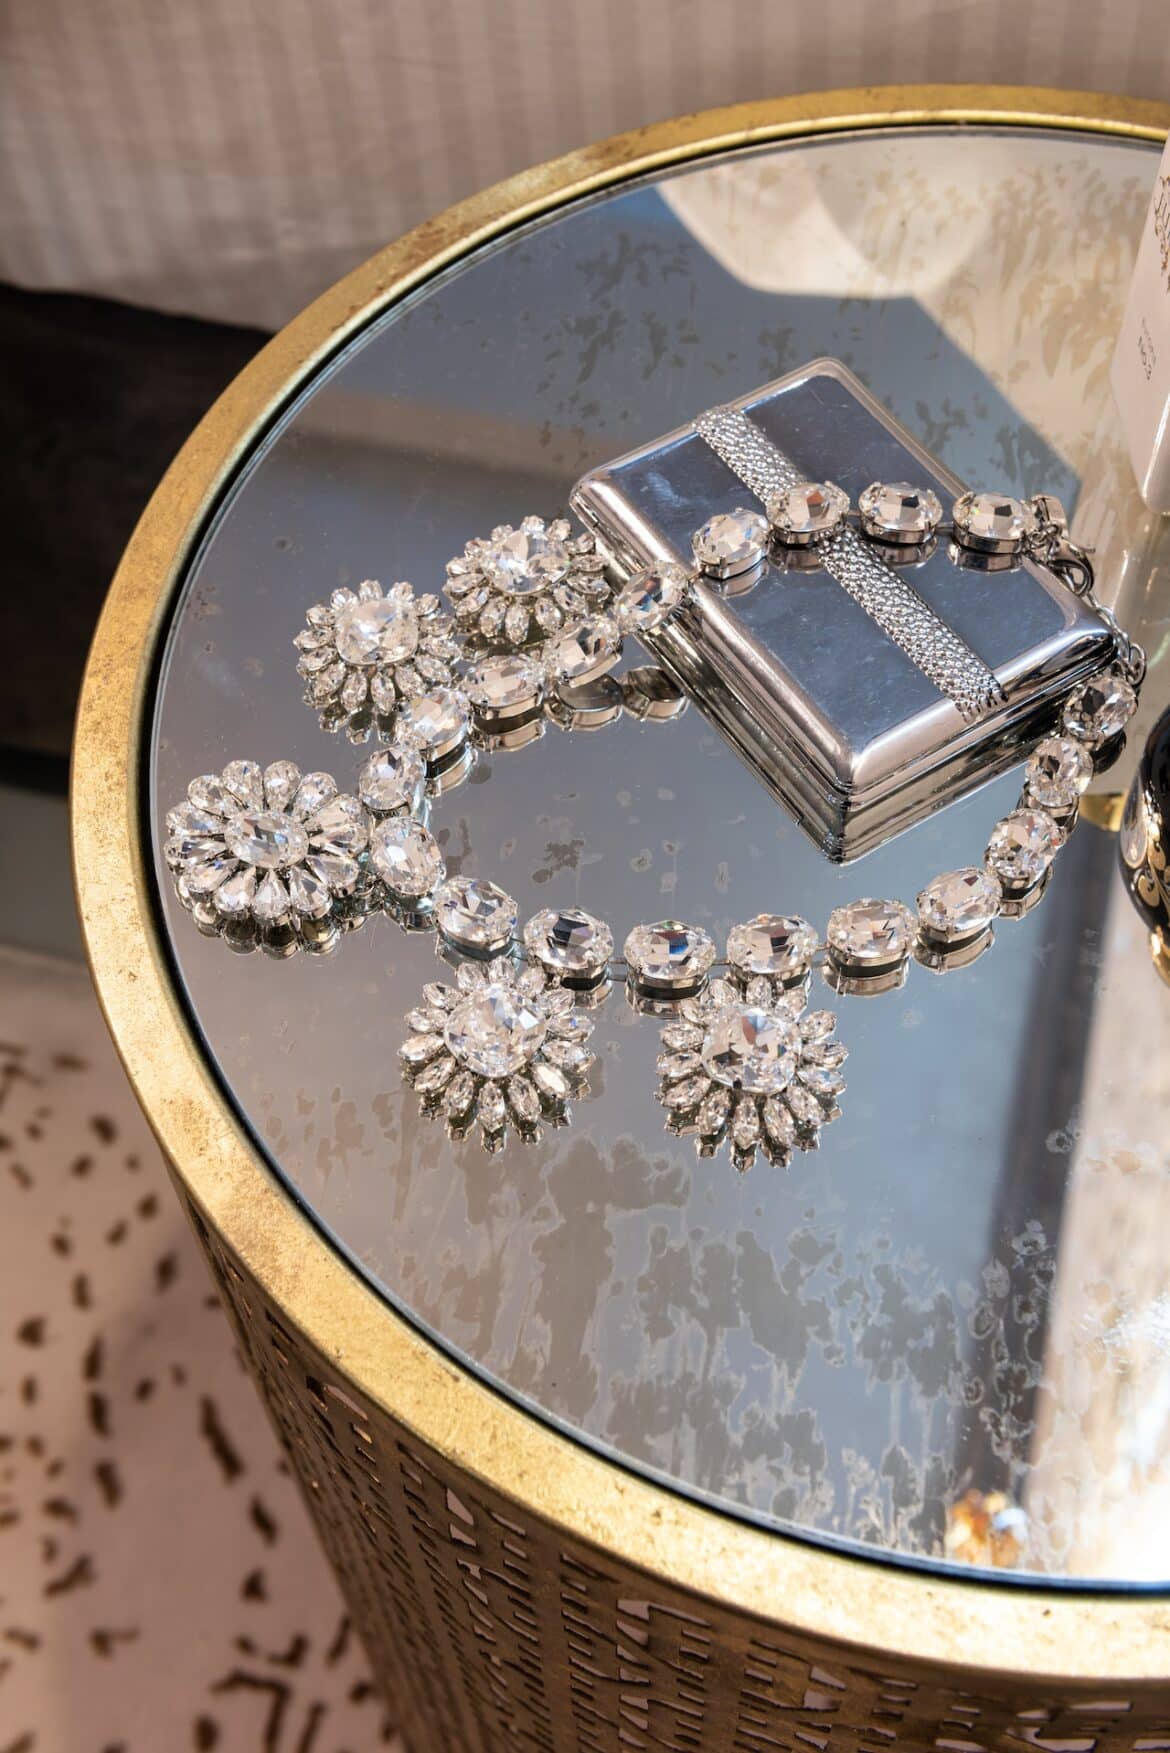 Sparkling Trends: A Look At The Latest Diamond Jewellery Styles